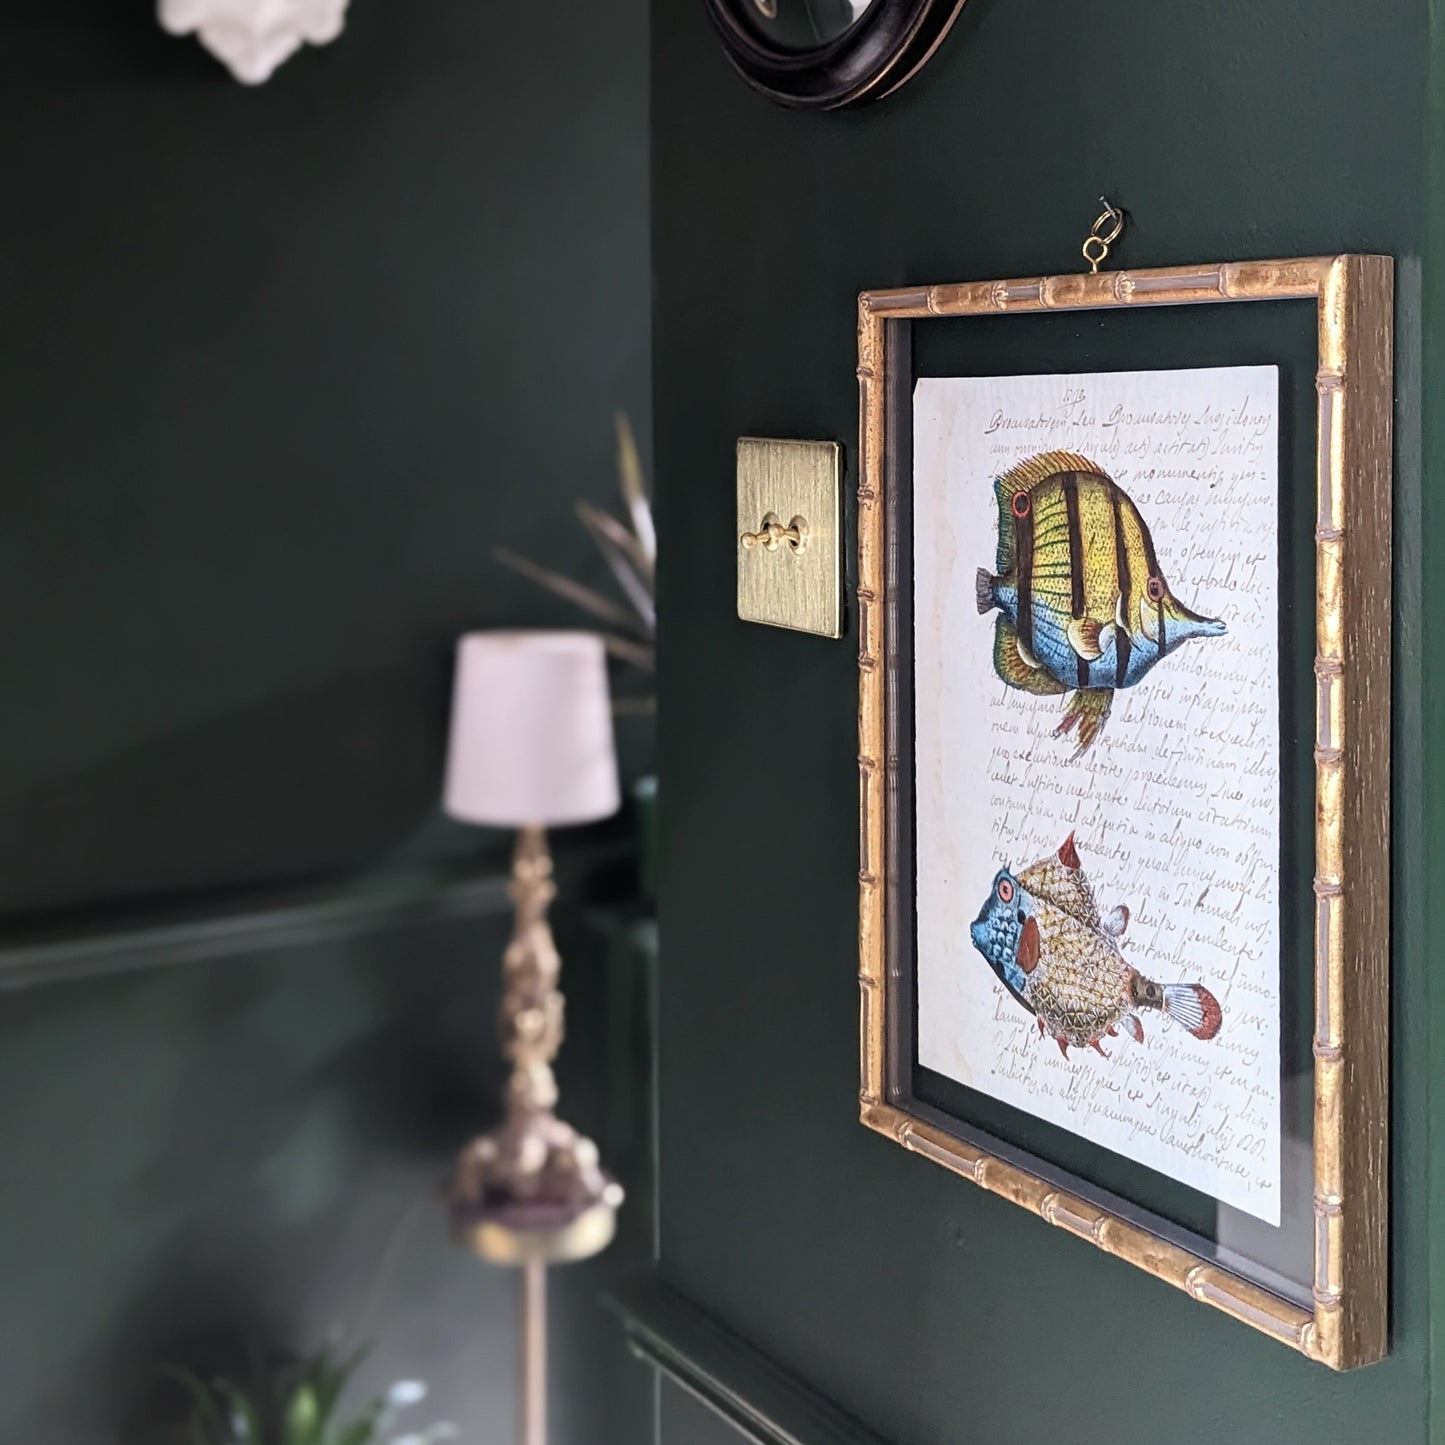 Framed Fish Antique Pages - Bamboo (3 styles)